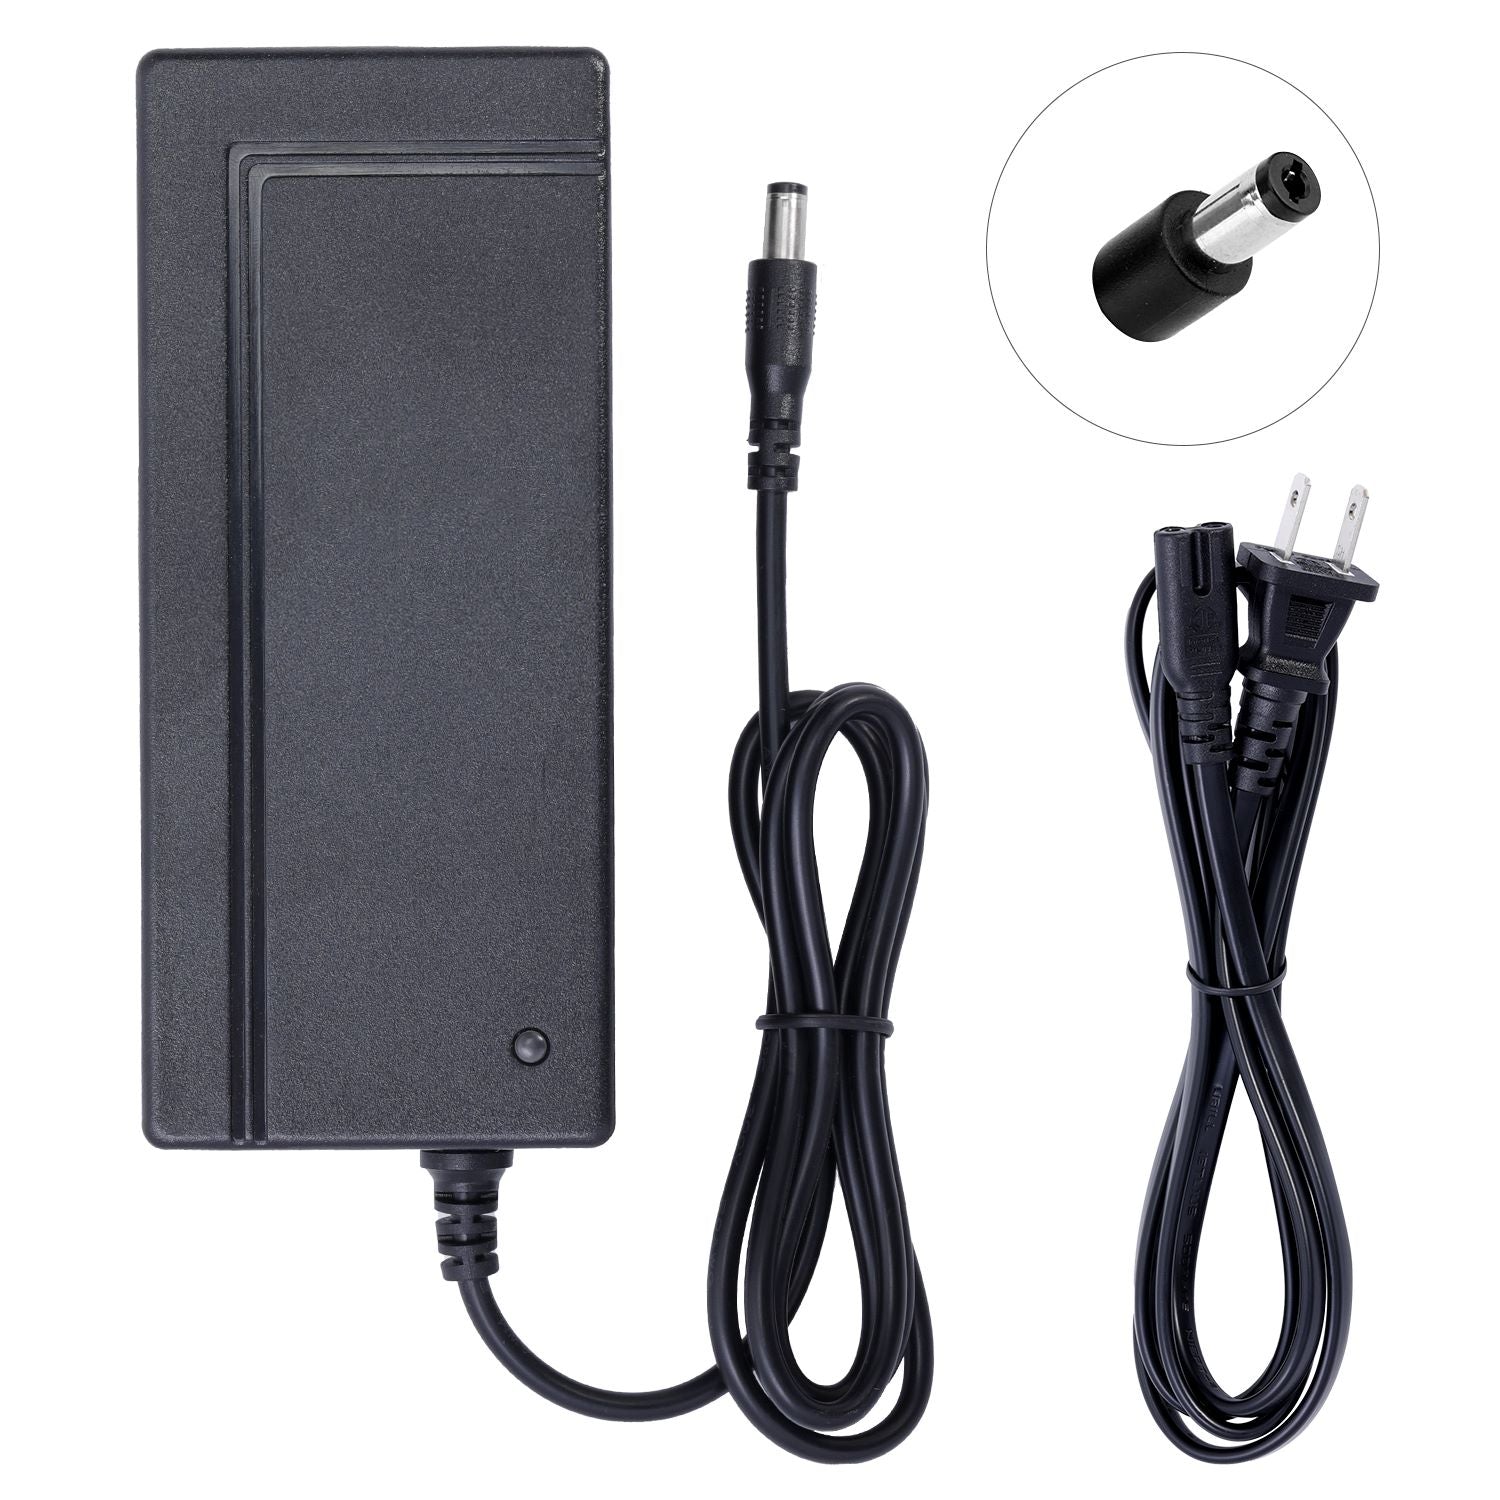 Charger for Surface 604 Electric Bike